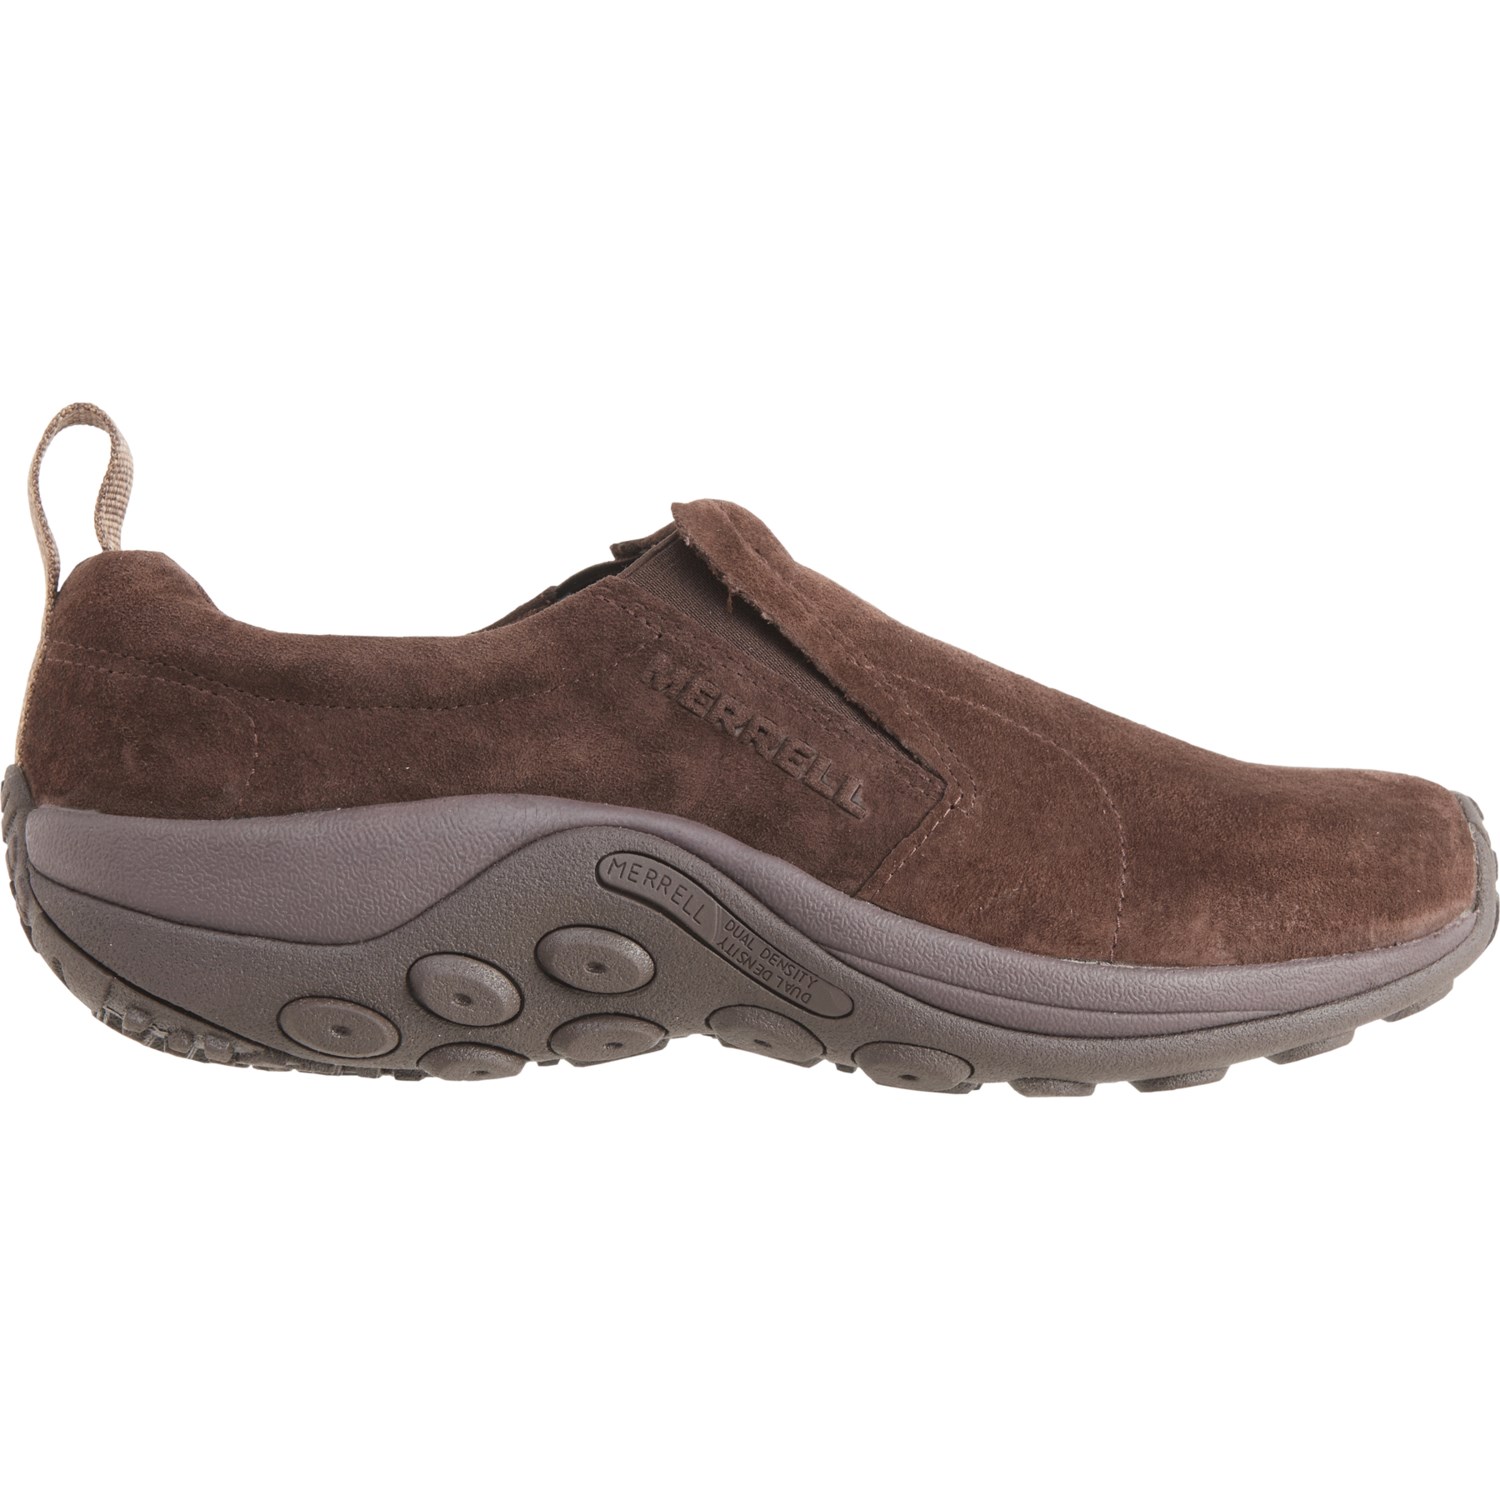 Merrell Jungle Moc Rinse Shoes (For Men) - Save 37%